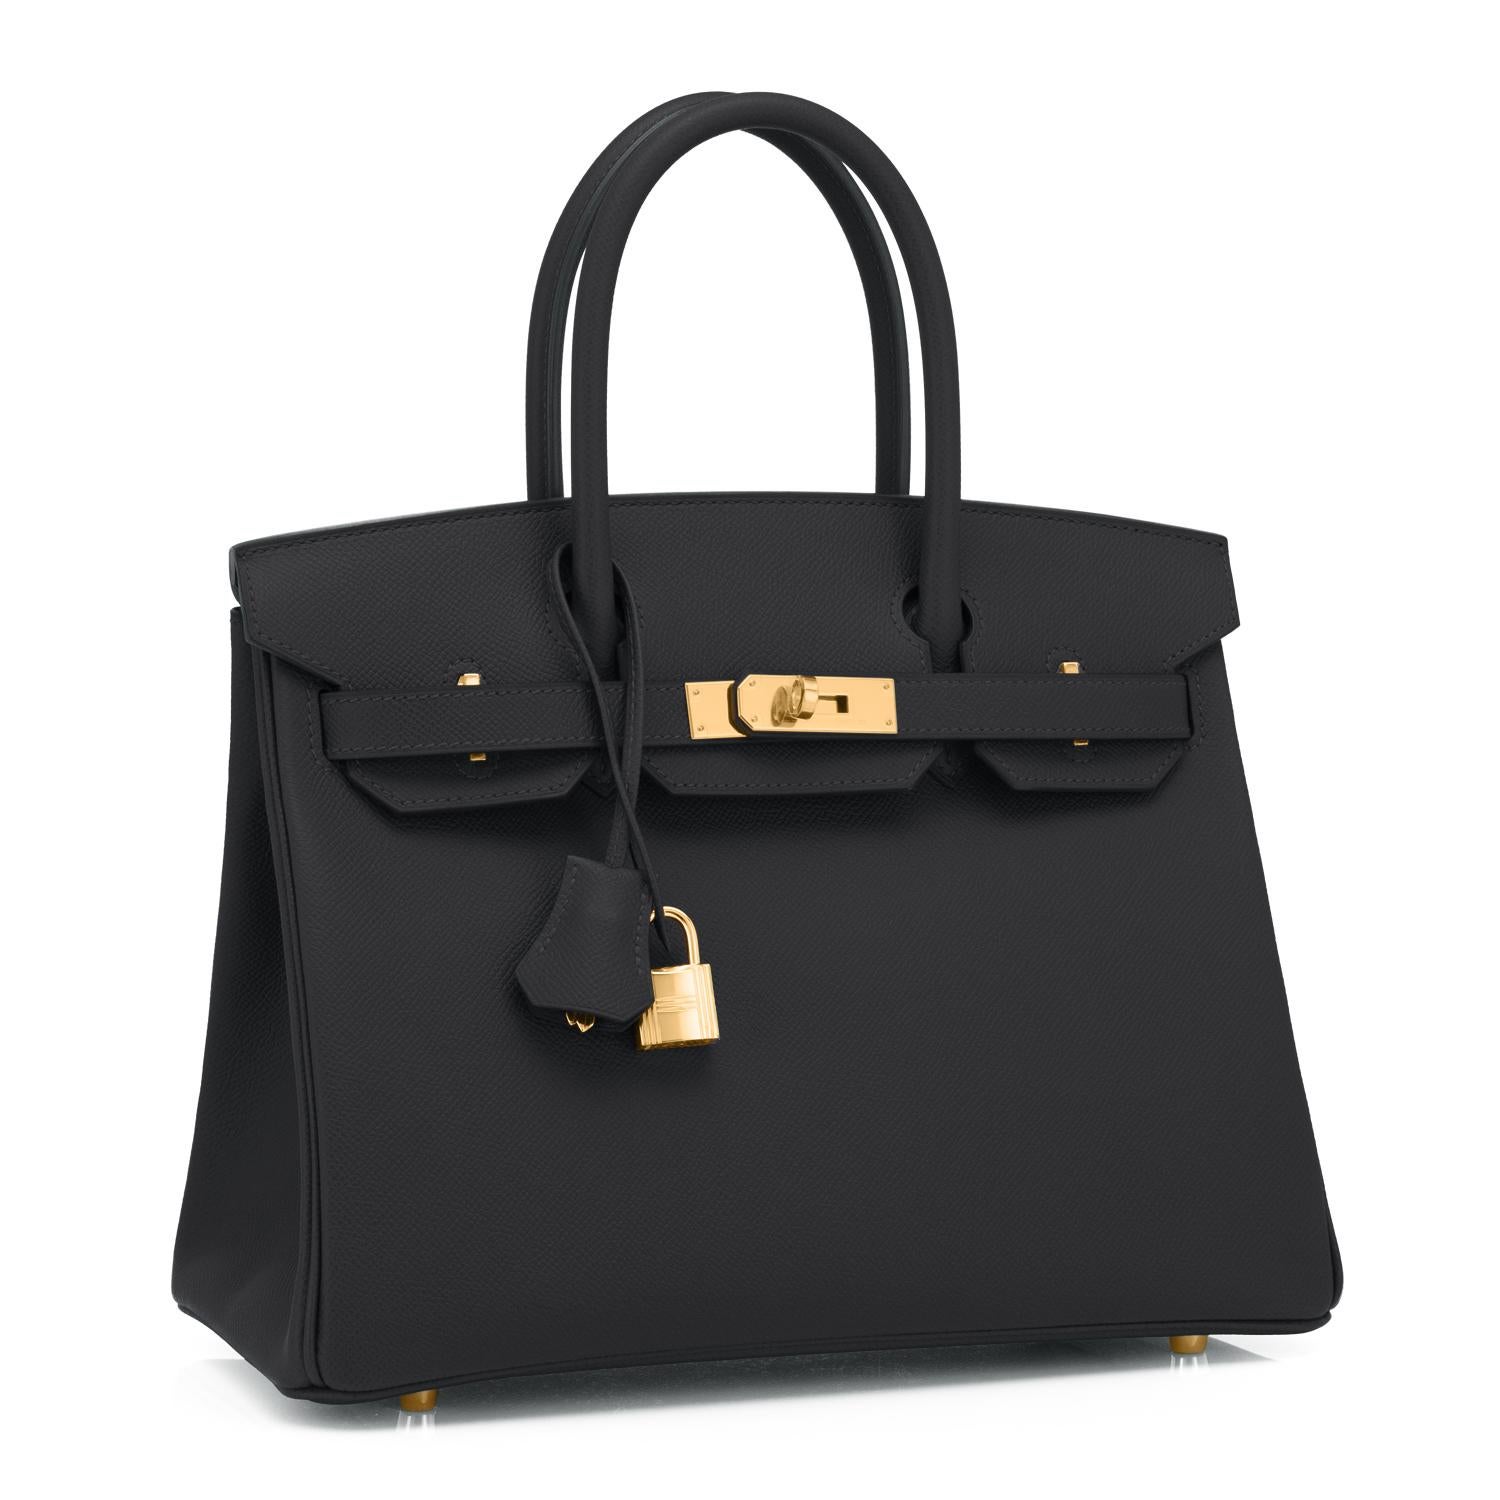 Hermes Birkin 30cm Black Epsom Gold Hardware Bag U Stamp, 2022
Just purchased from Hermes store; bag bears new interior 2022 U Stamp.
Brand New in Box. Store fresh.  Pristine Condition (with plastic on hardware)
Perfect gift! Comes with keys, lock,